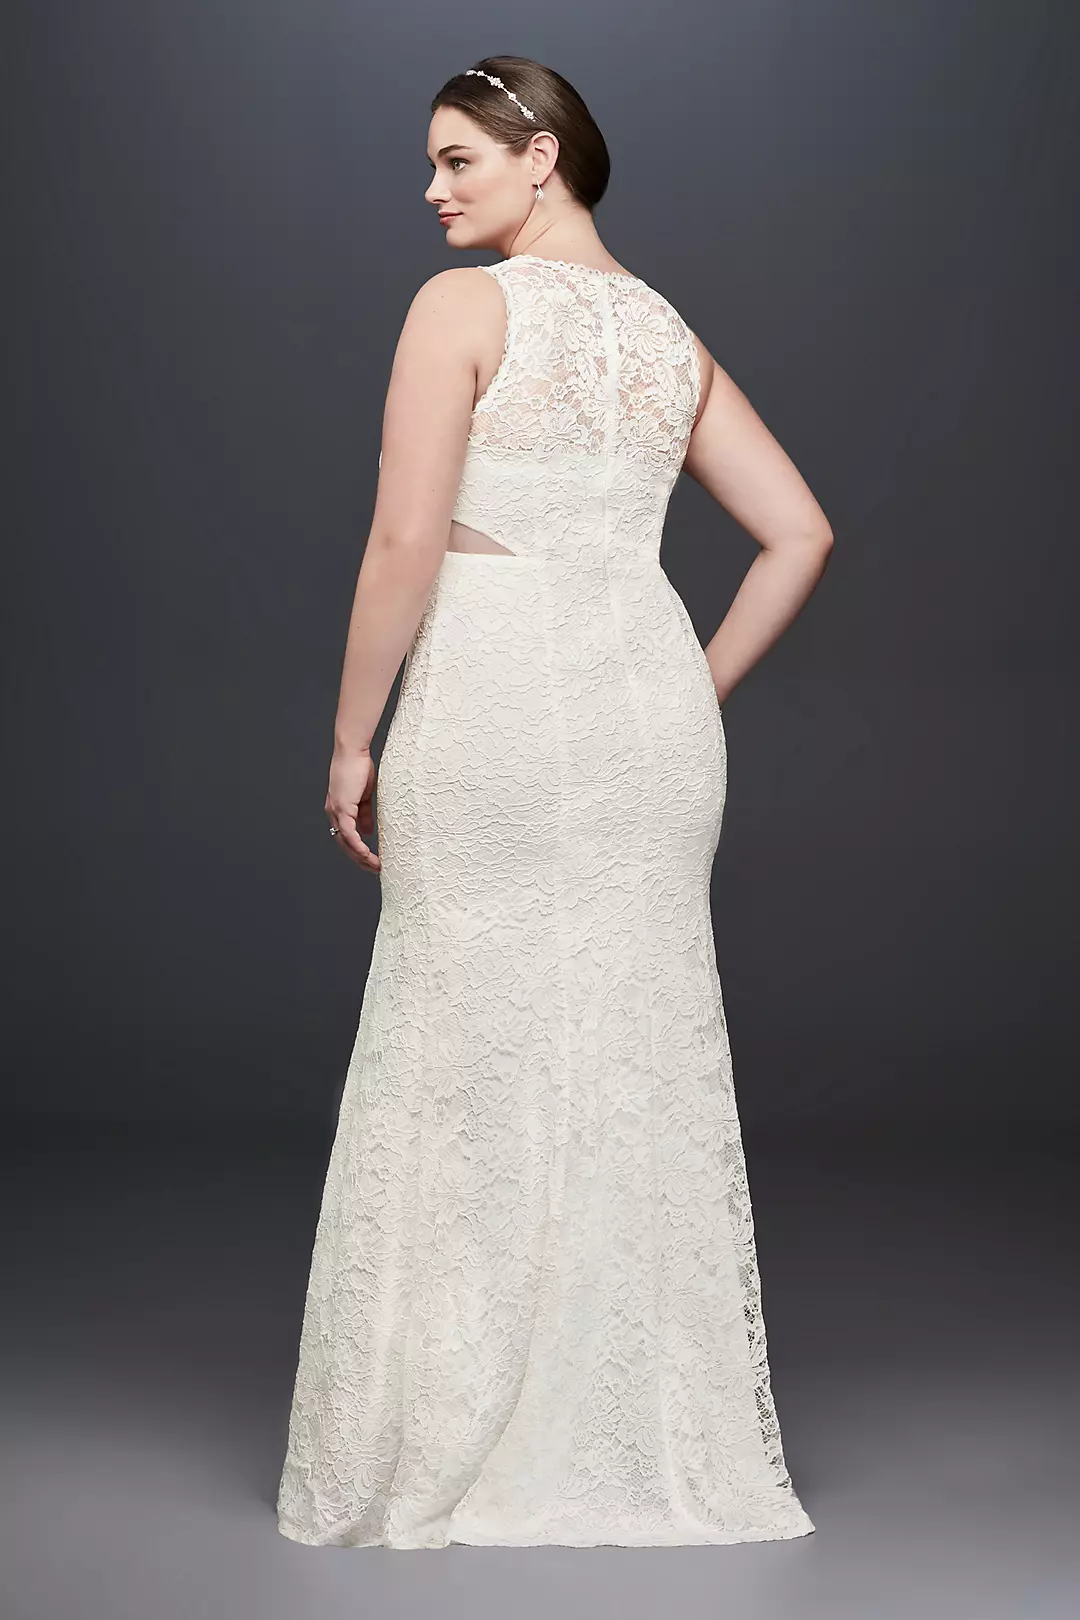 Corded Lace Trumpet Dress with Illusion Sides Image 2